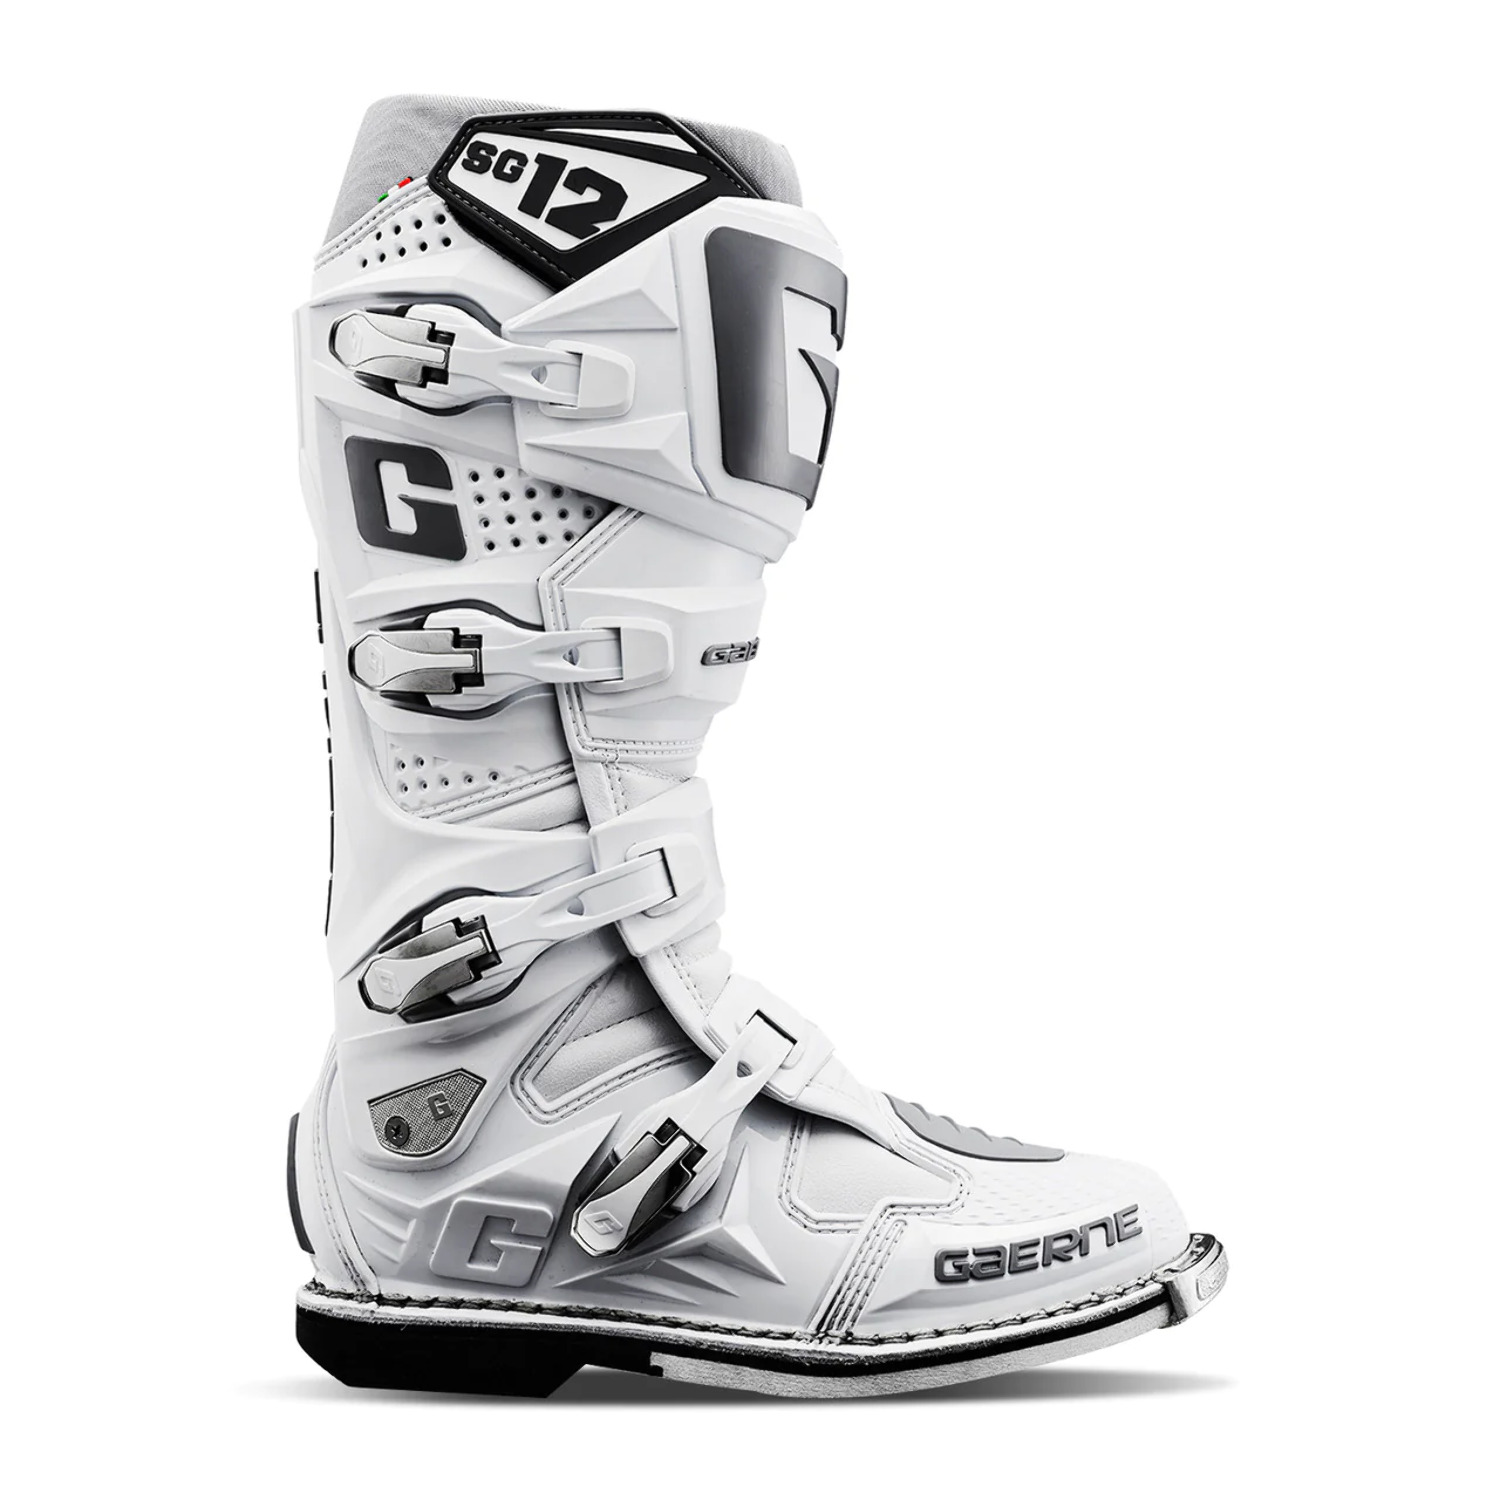 Gaerne SG12 Mens MX Offroad Boots White/Silver 13 USA - image 2 of 9